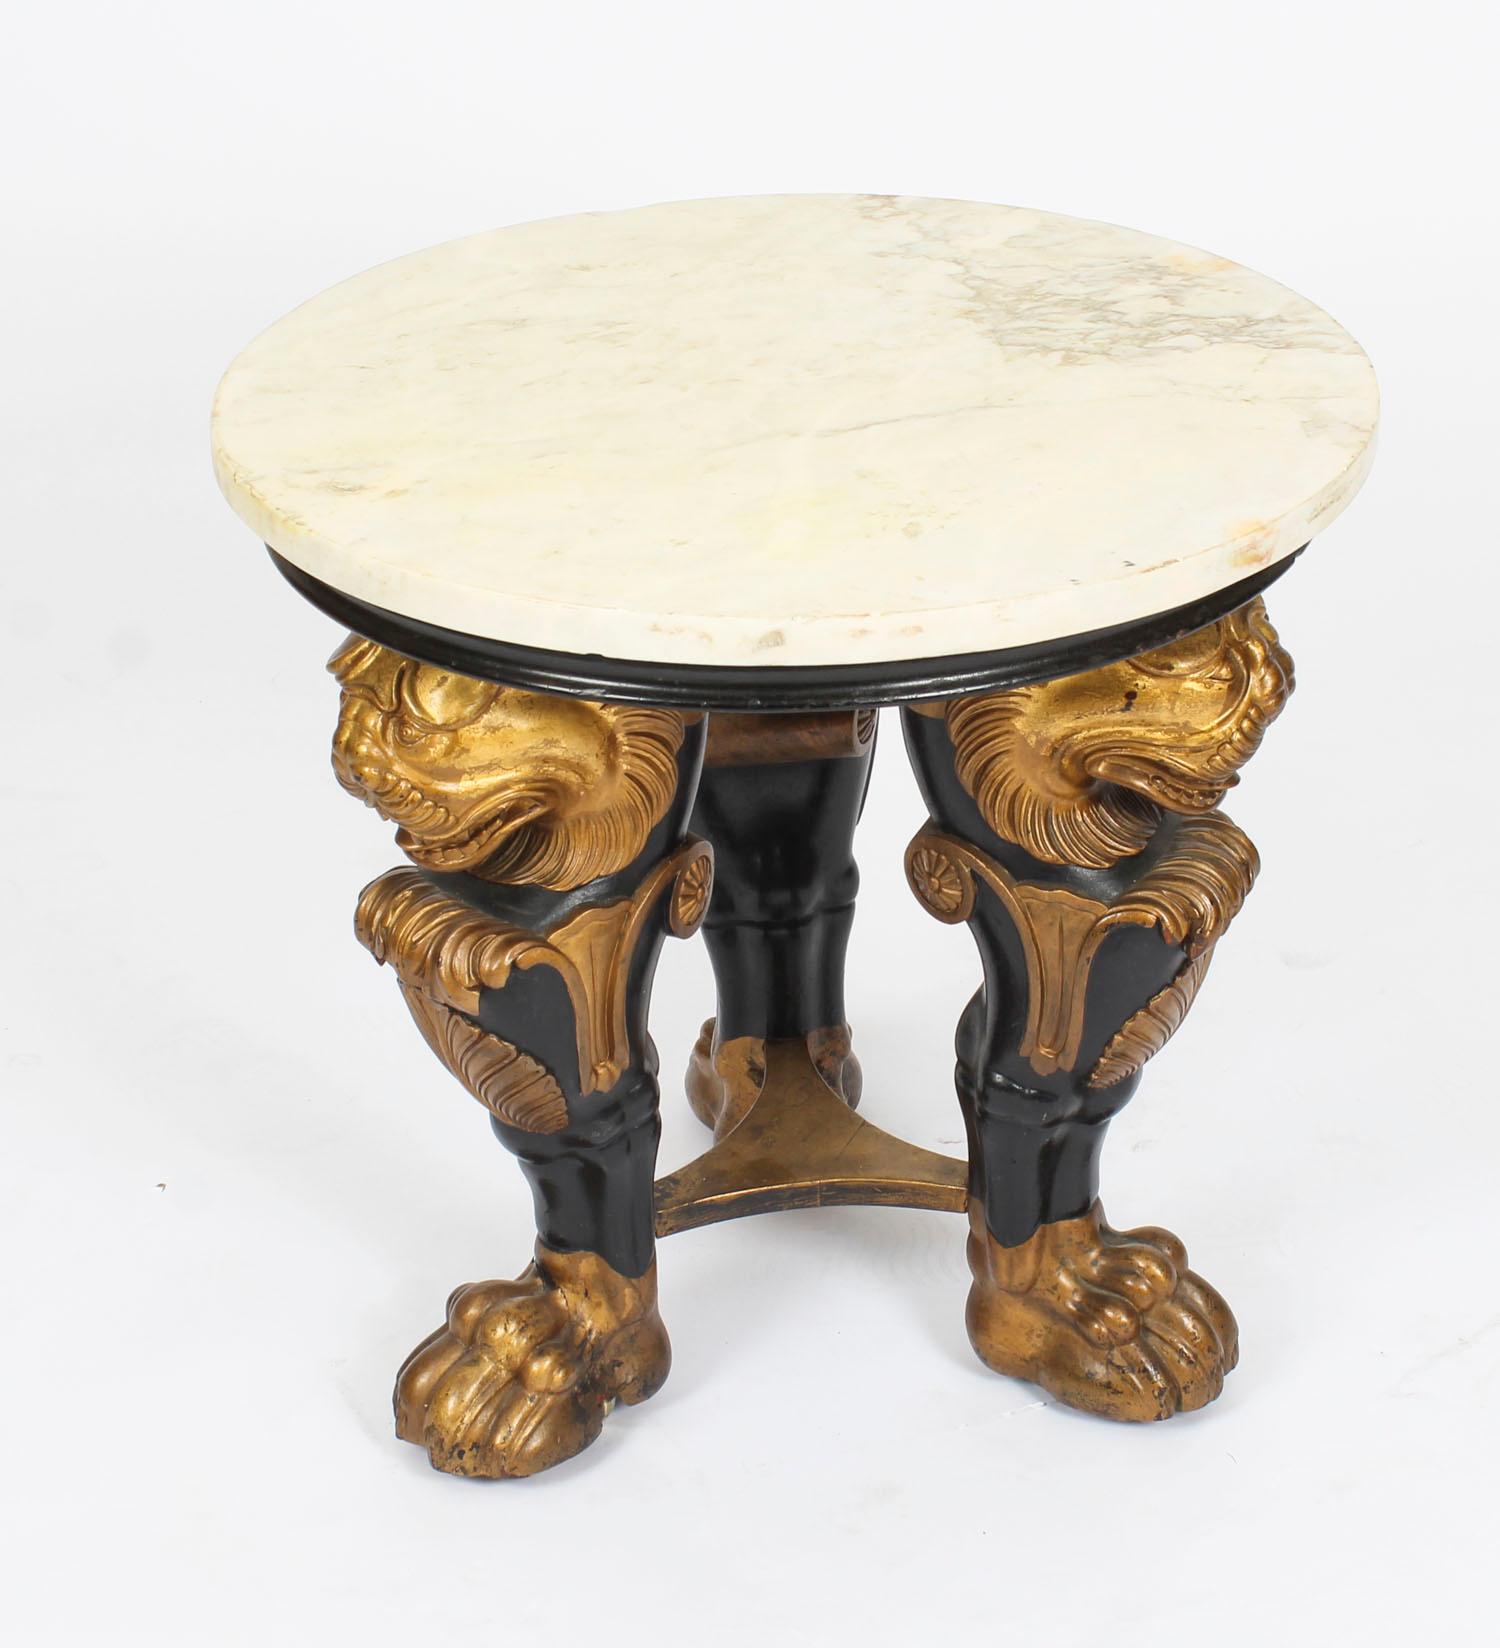 This is a stylish Regency Revival marble topped occasional table with ebonized and gilt decoration, depicting decorative lion's head legs with carved shell and leaf carved knees above lion's paw feet, circa 1880 in date.

Condition:
In excellent